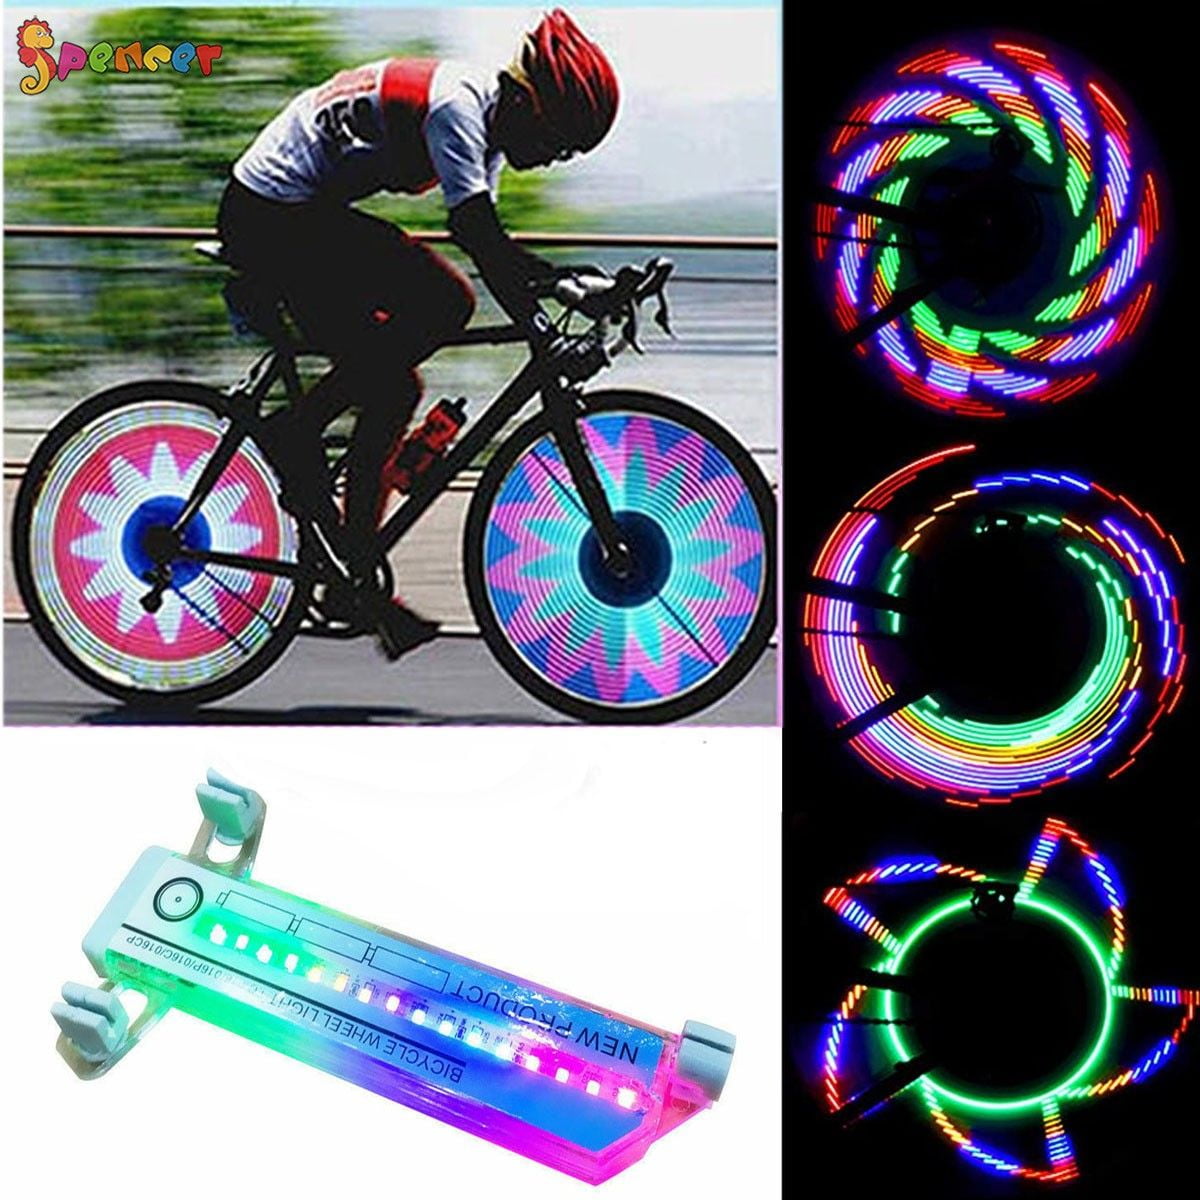 32 Pattern LED Colorful Bike Wheel Tire Spoke Signal Light For Bicycle Safety 